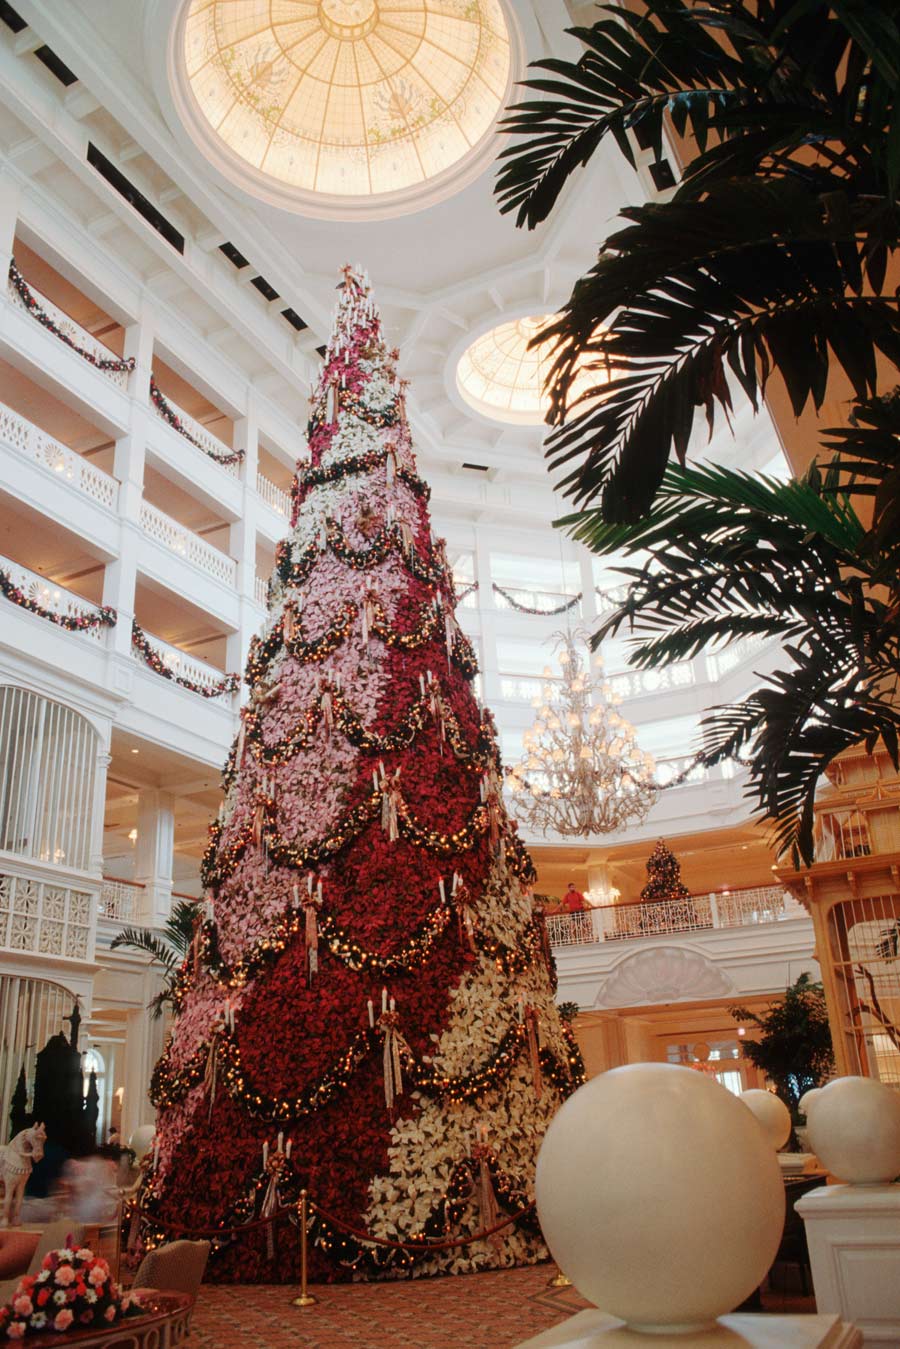 A large poinsettia tree at Disney’s Grand Floridian Resort & Spa in 1992